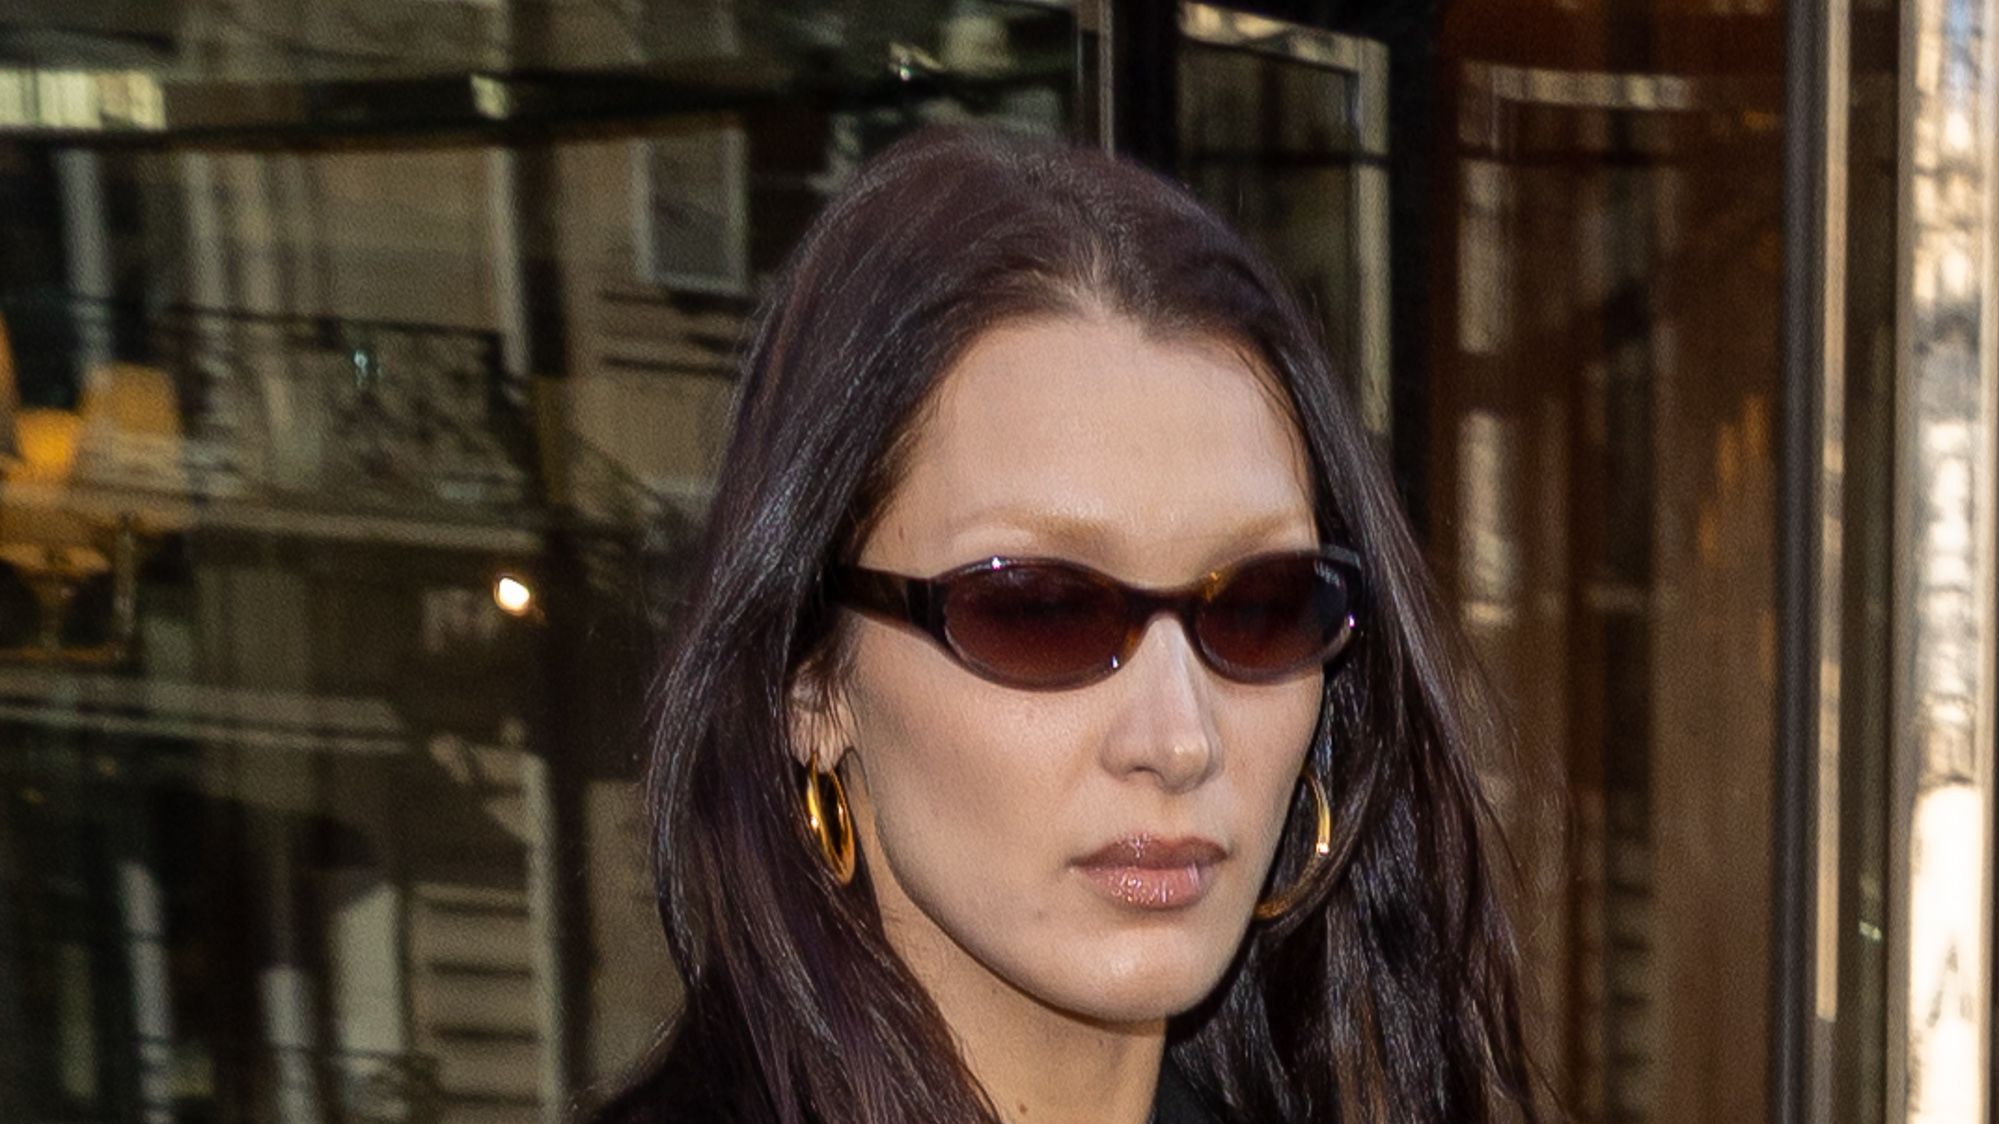 Bella Hadid on Feeling Like the 'Uglier Sister' and Nose Job Regrets